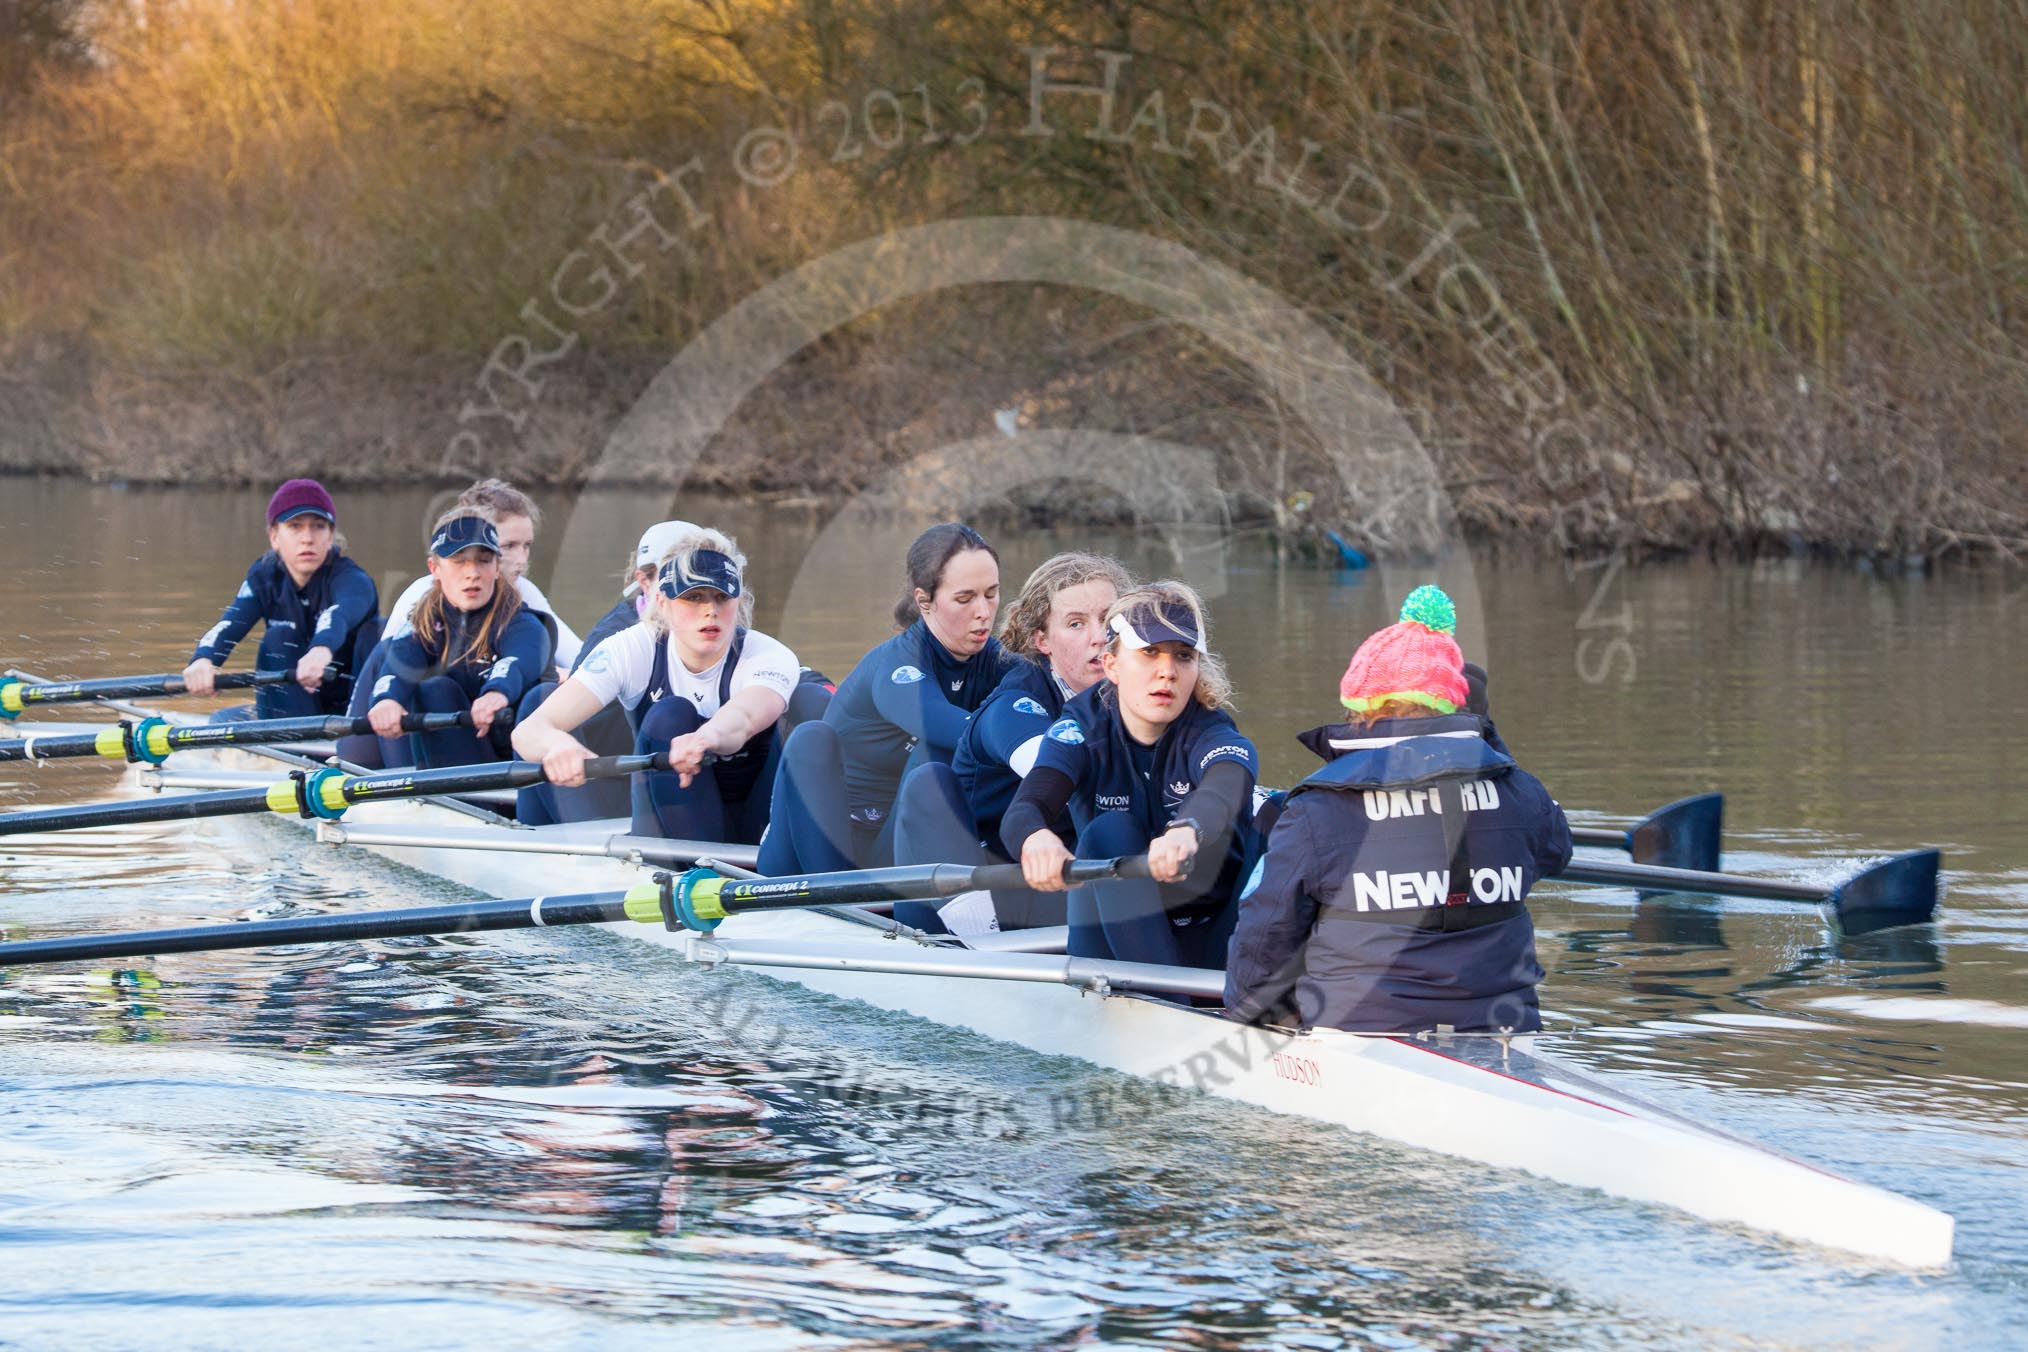 The Boat Race season 2013 - OUWBC training: The OUWBC Blue Boat during the training session - bow Mariann Novak, Alice Carrington-Windo, Mary Foord-Weston, Jo Lee, Amy Varney, Harriet Keane, Anastasia Chitty, stroke Maxie Scheske, and cox Katie Apfelbaum..
River Thames,
Wallingford,
Oxfordshire,
United Kingdom,
on 13 March 2013 at 17:14, image #115